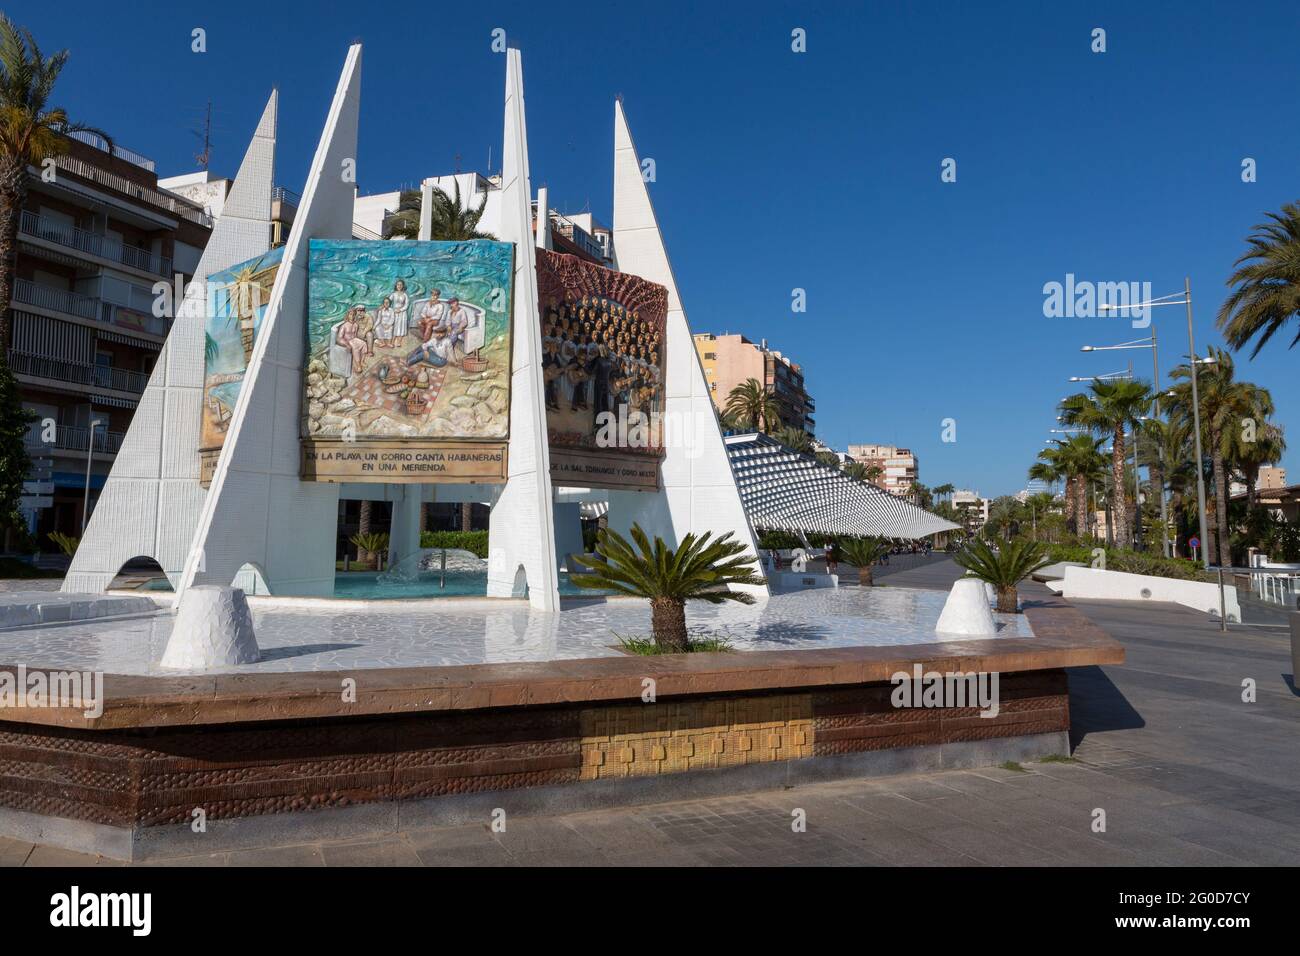 In the Paseo de Vista Alegre Monument to the Habaneras, a tribute to the Habaneras festival that is held every year in July, and which is a Contest of Stock Photo